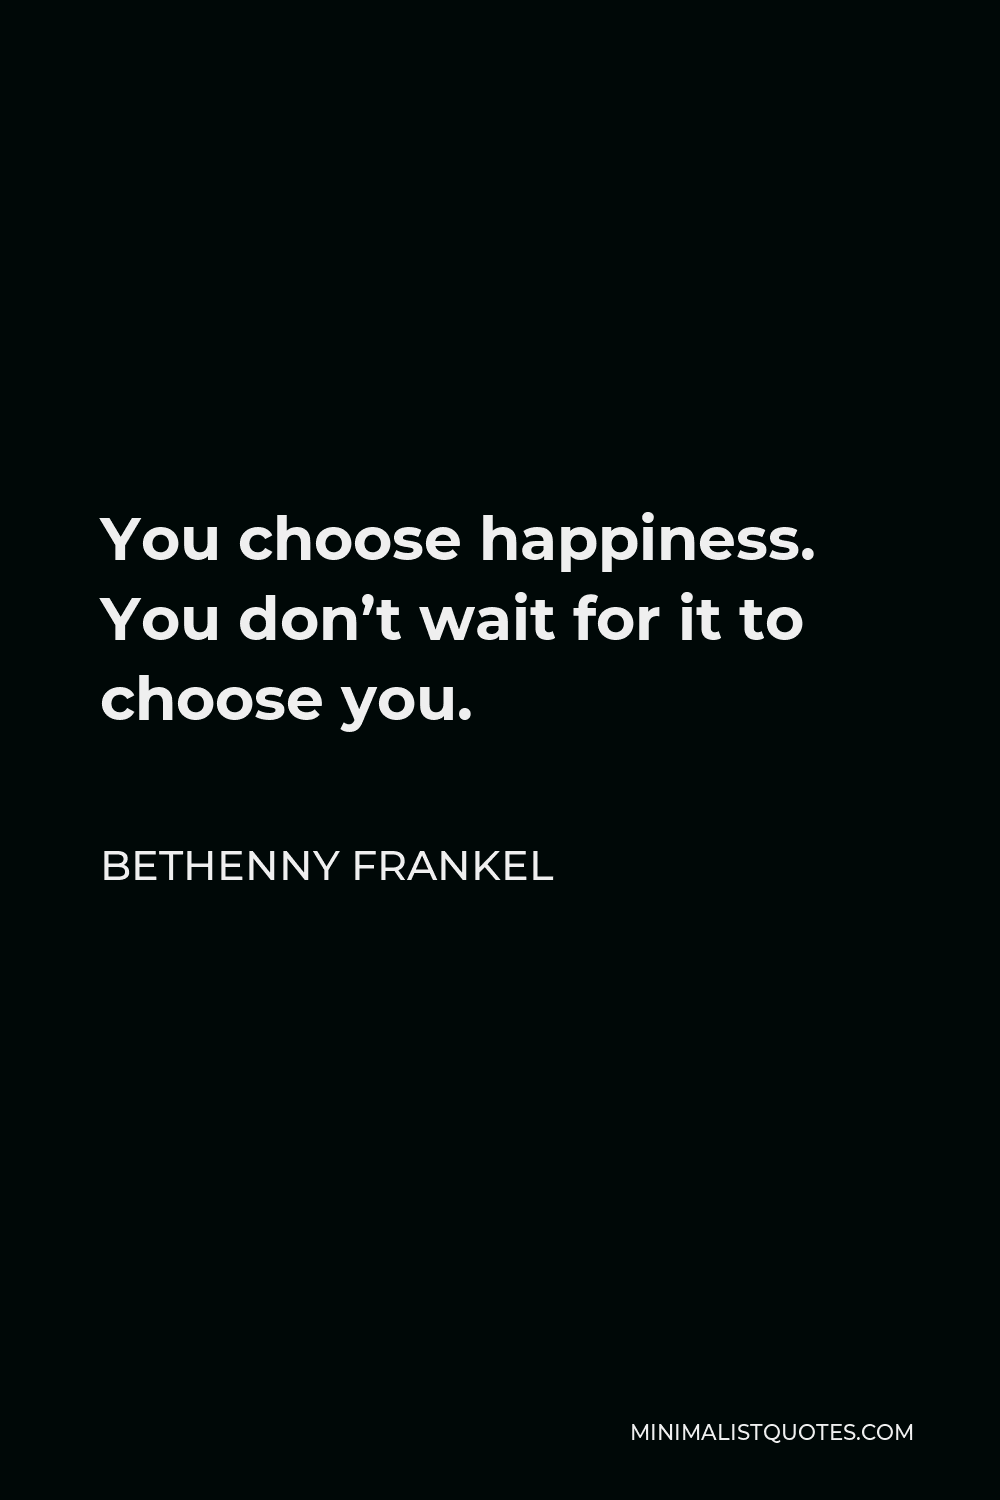 Bethenny Frankel Quote - You choose happiness. You don’t wait for it to choose you.